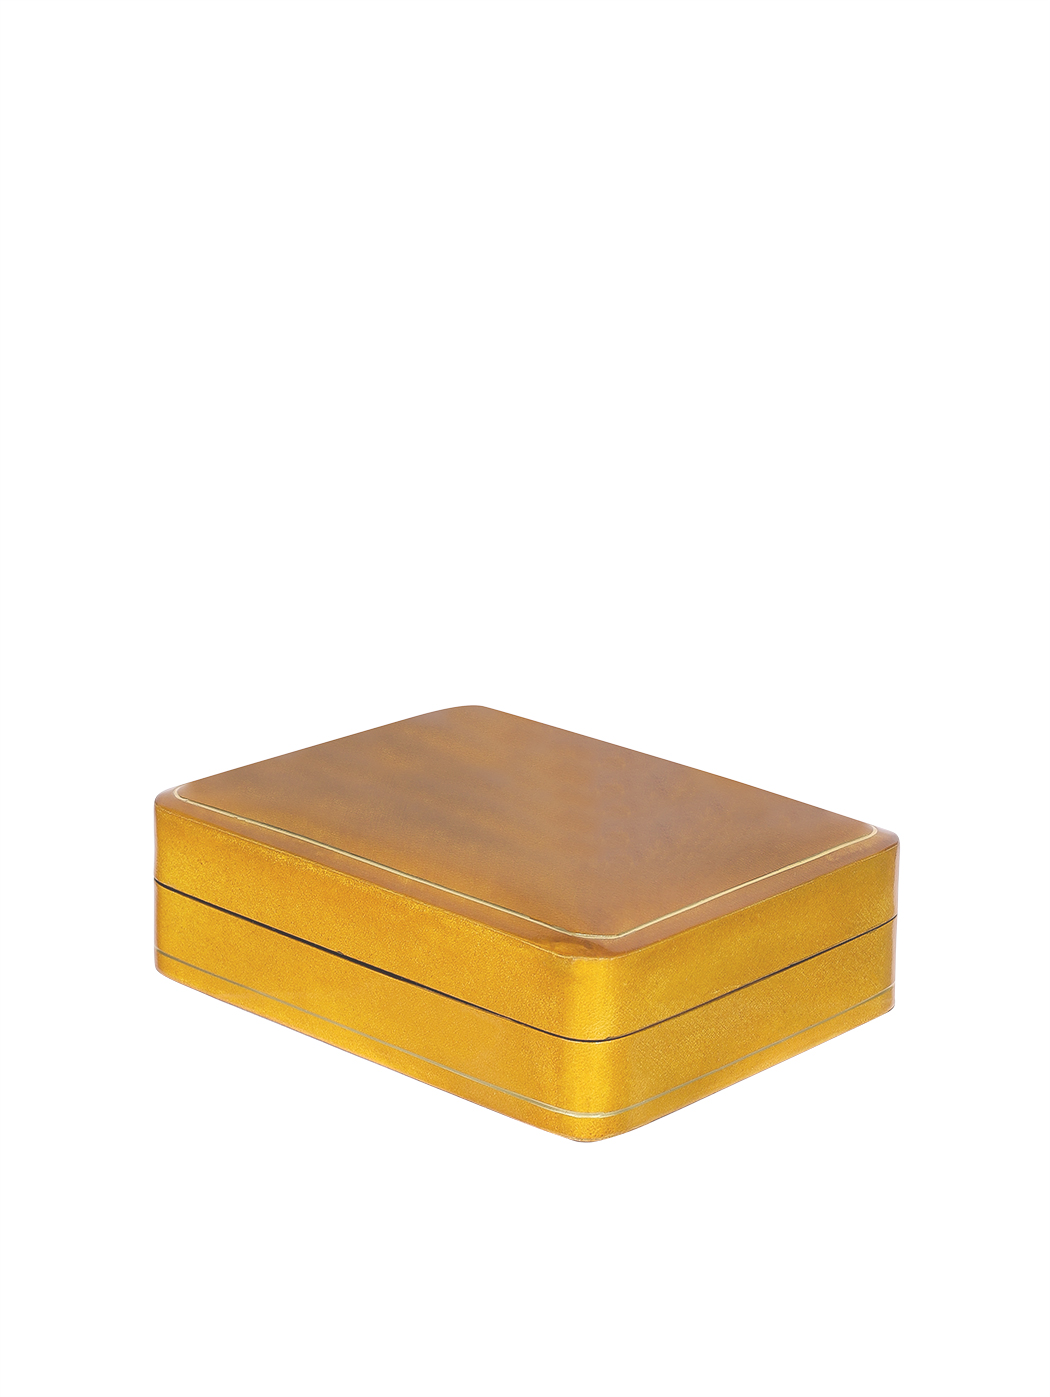 Large Decorative Box Wet Formed Leather Yellow